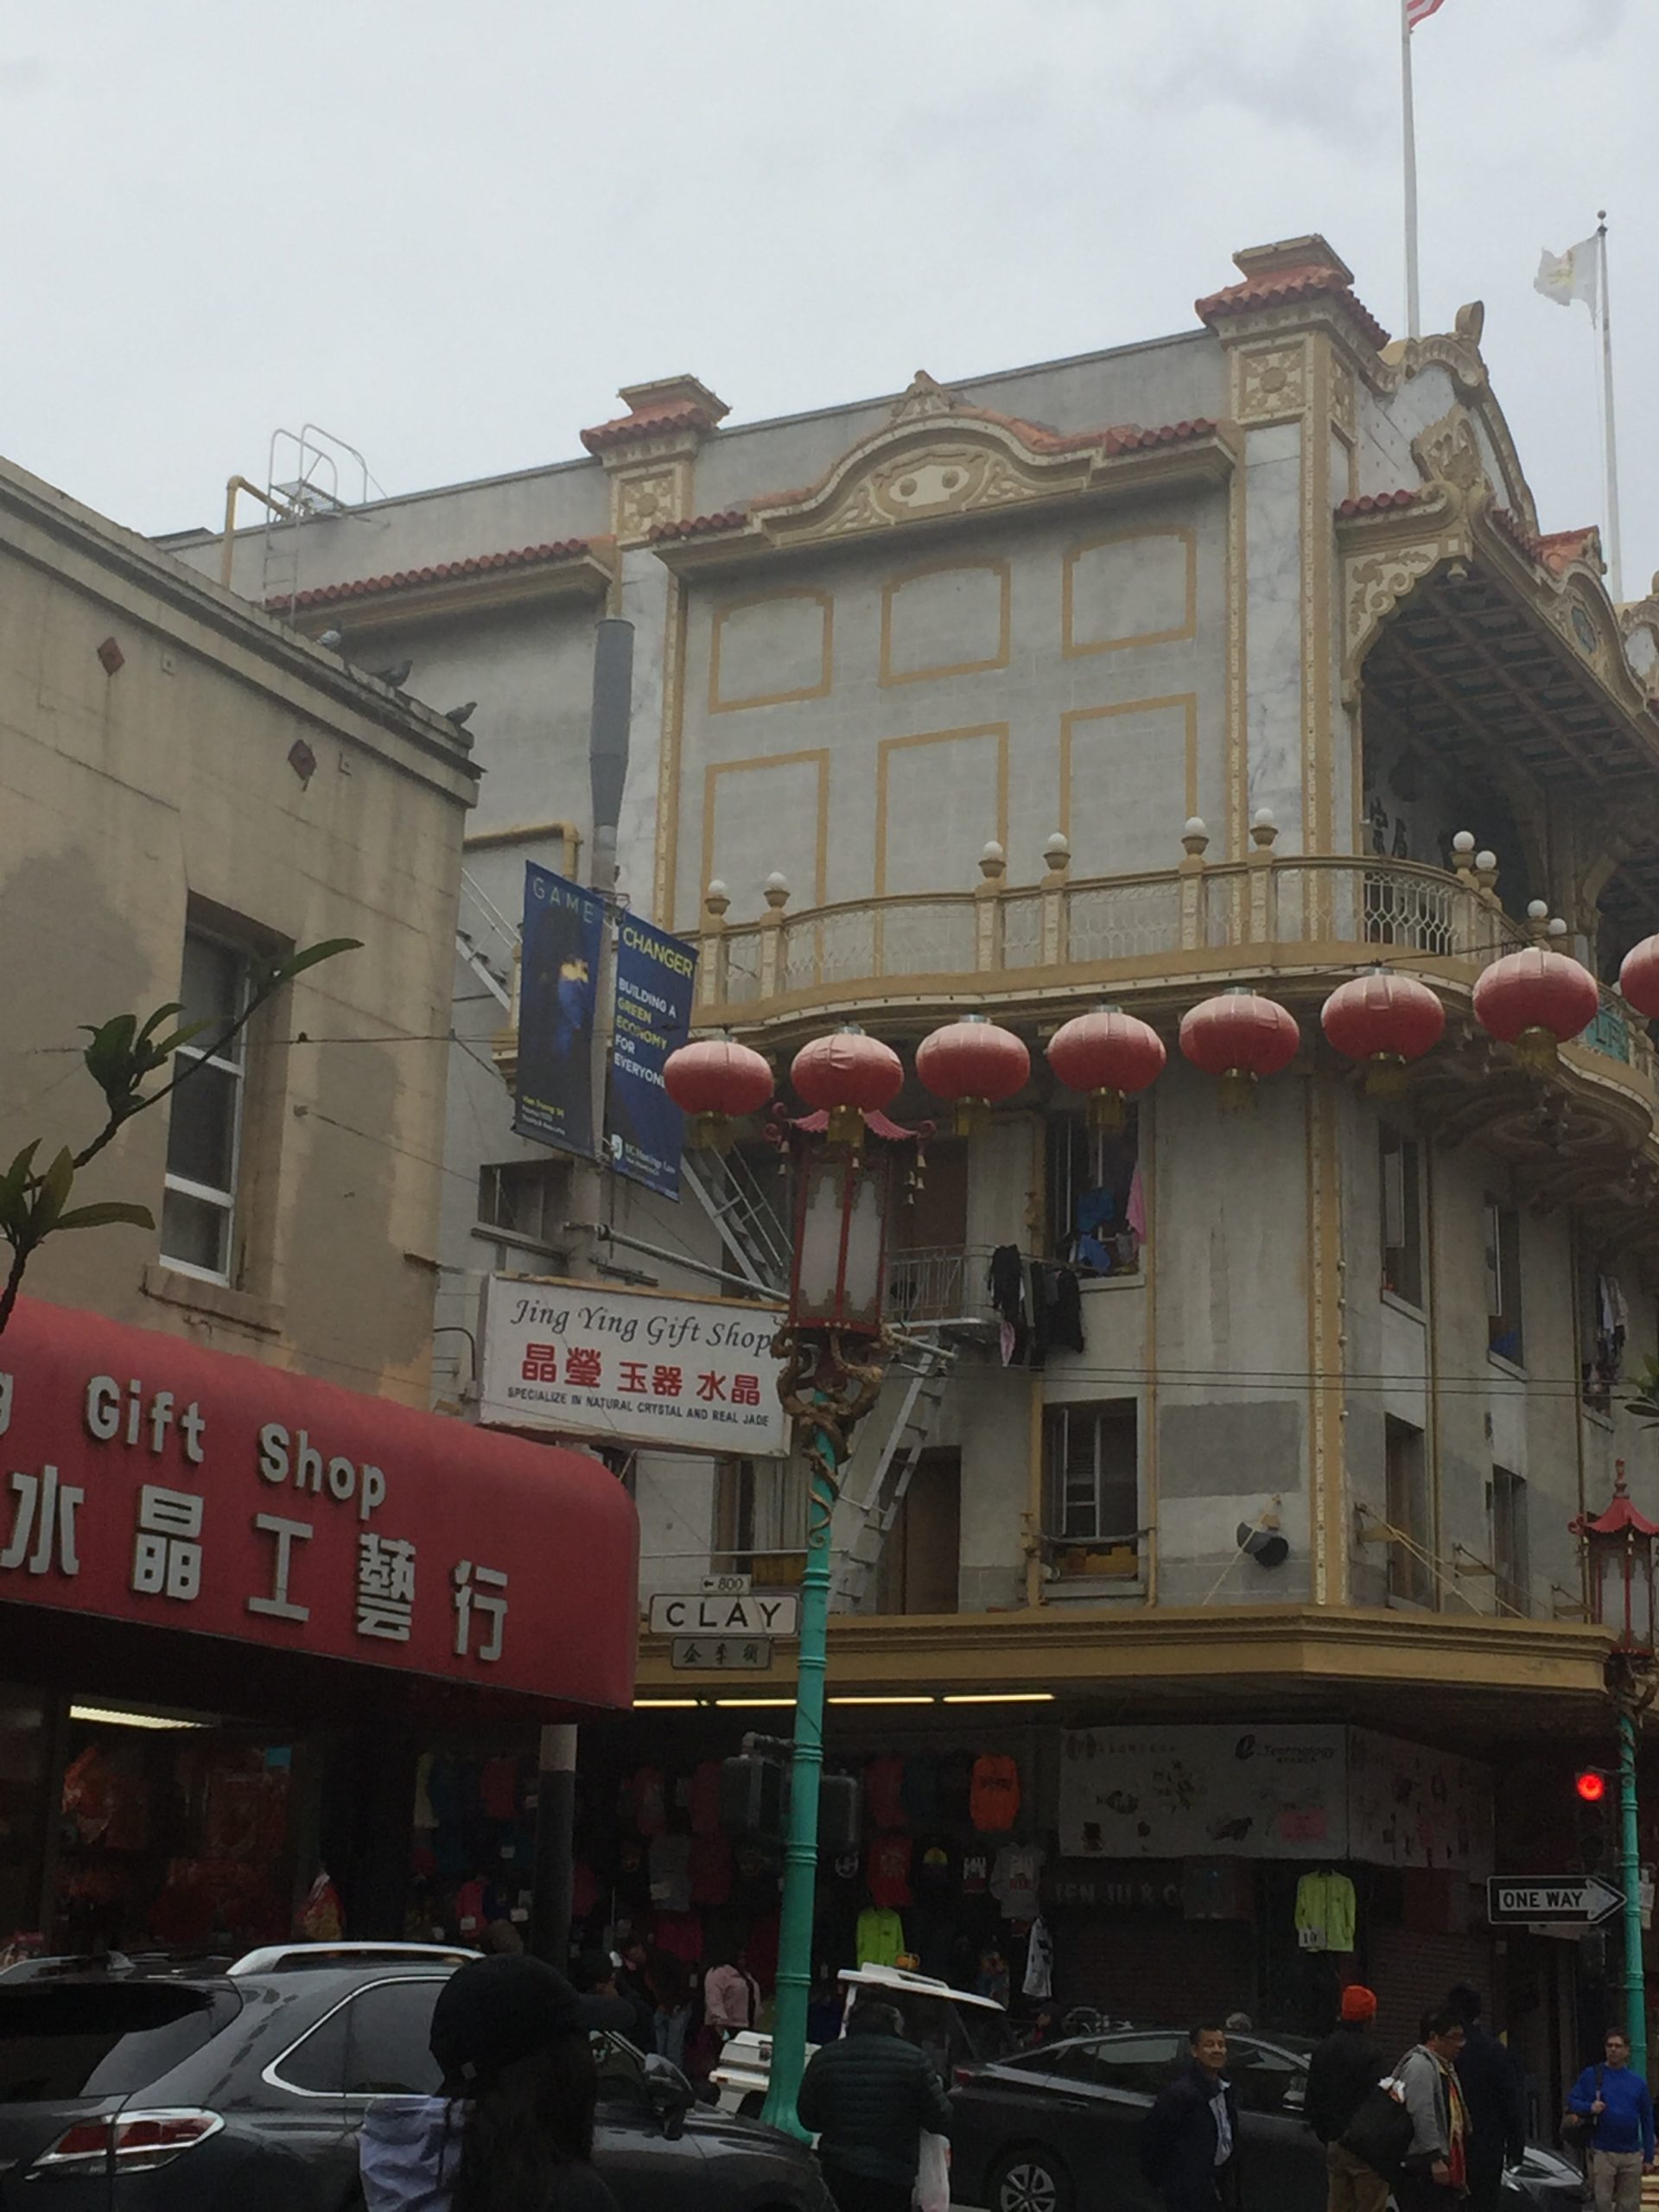 Old buildings in Chinatown, San Francisco